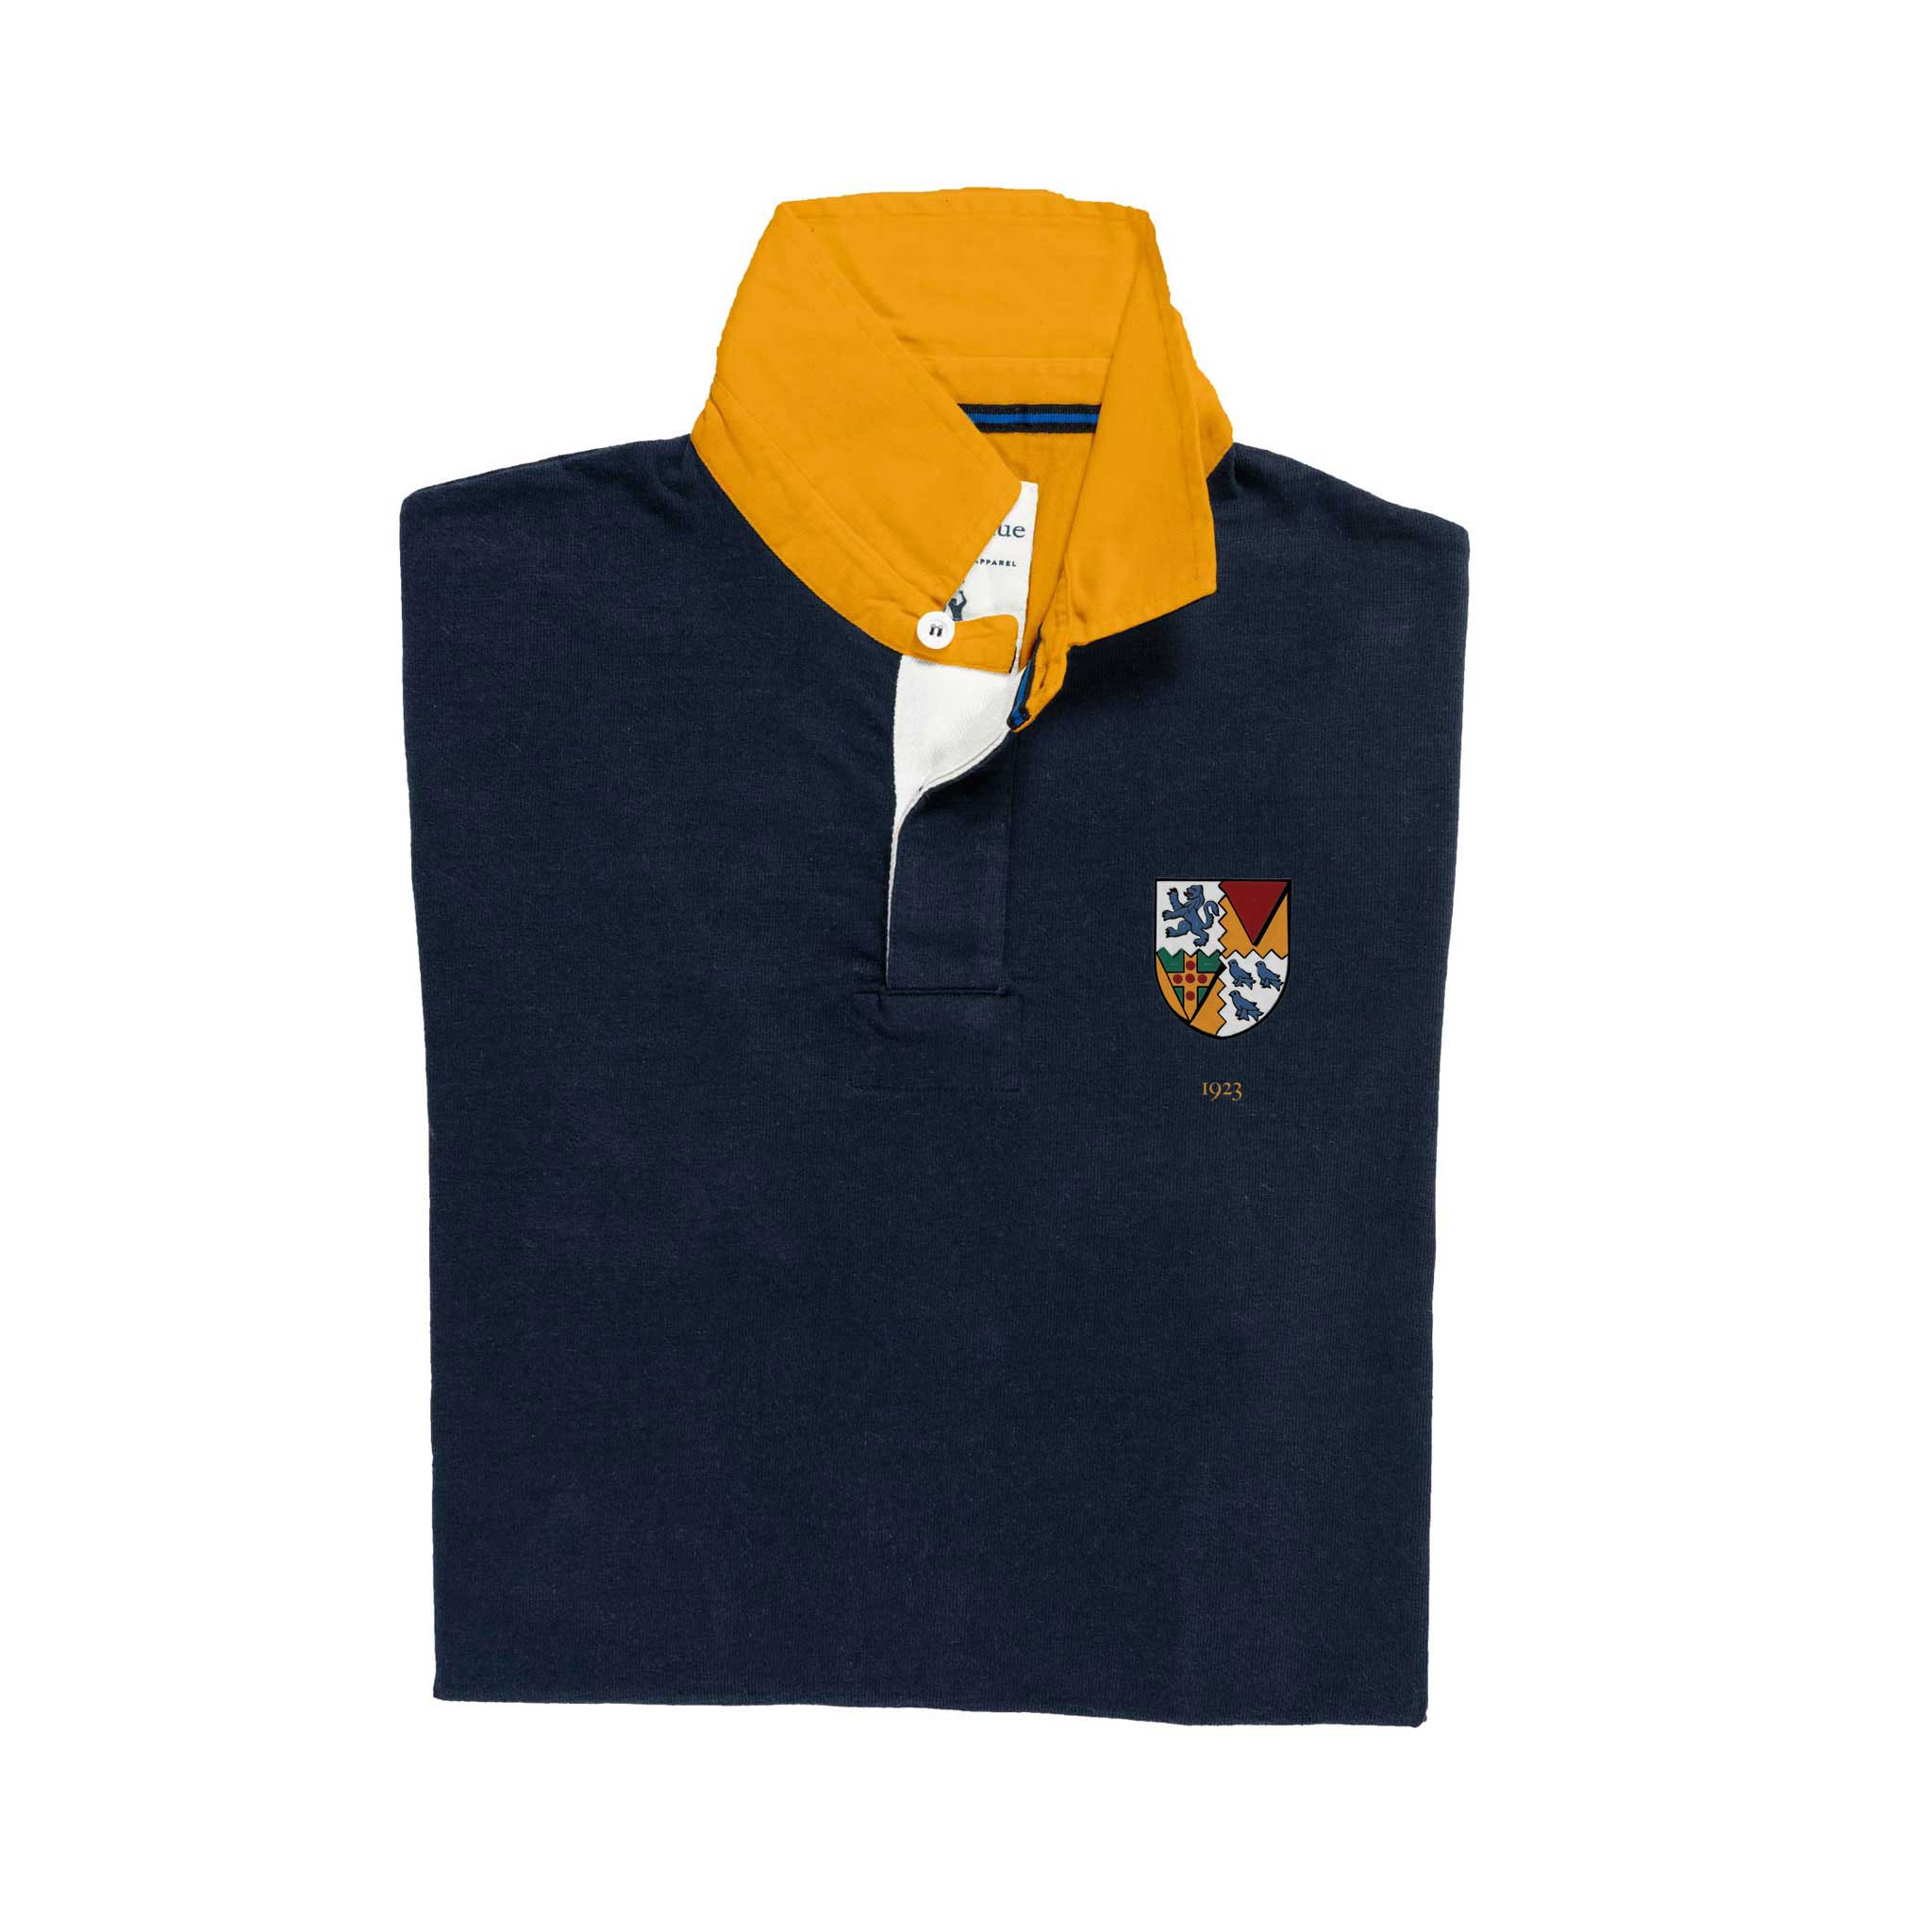 Stowe 1923 Rugby Shirt_Folded